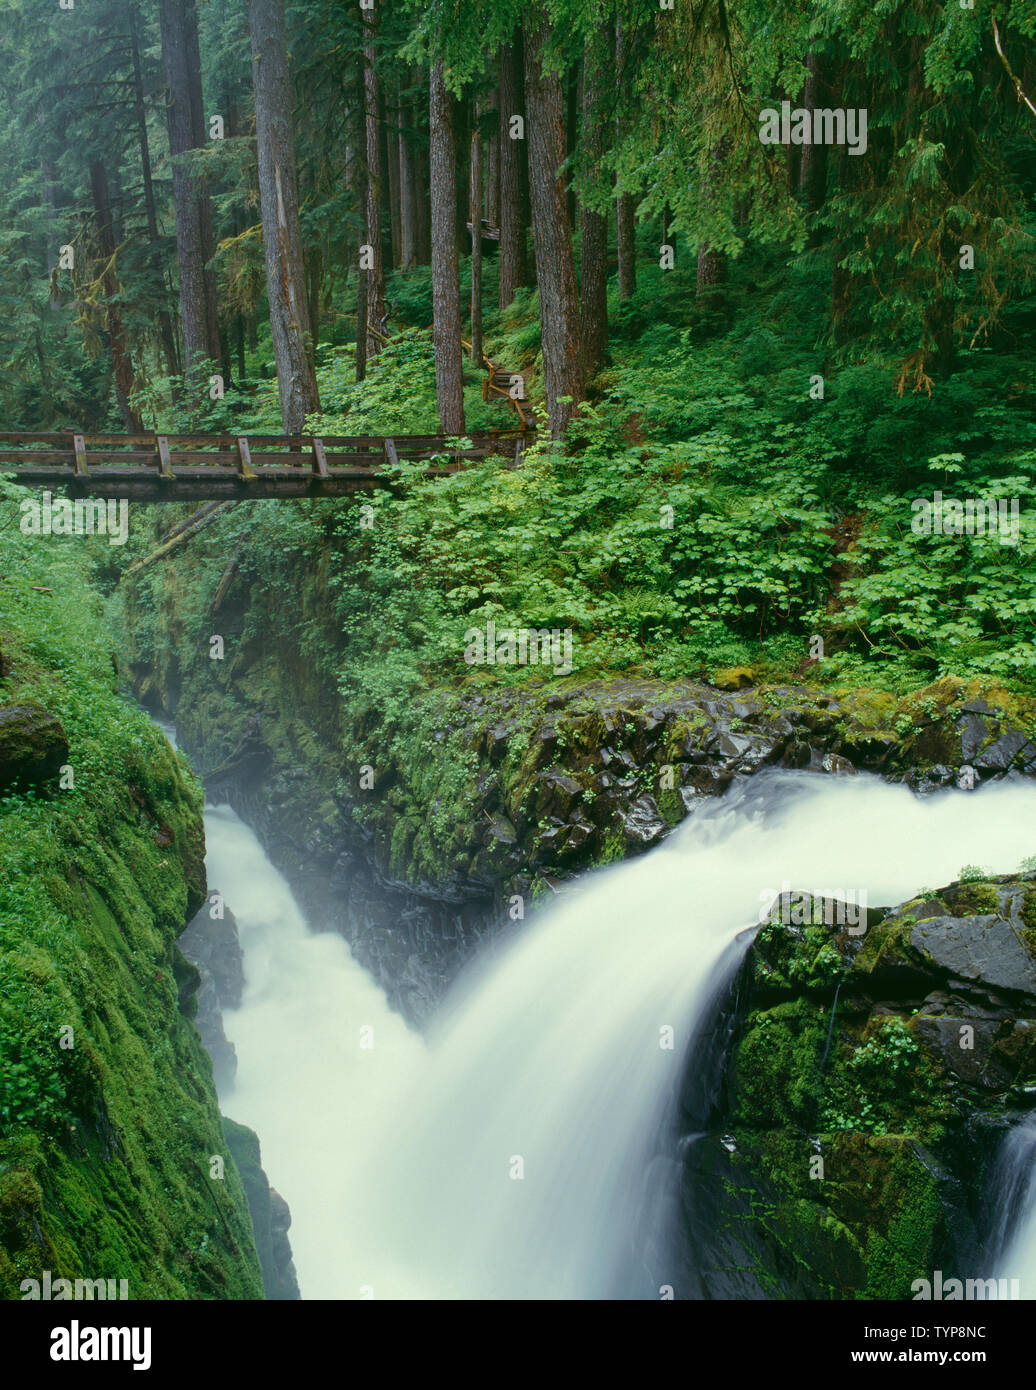 USA, Washington, Olympic National Park, Sol Duc Falls has carved a deep gorge beneath bridge in ancient forest; Sol Duc Valley. Stock Photo